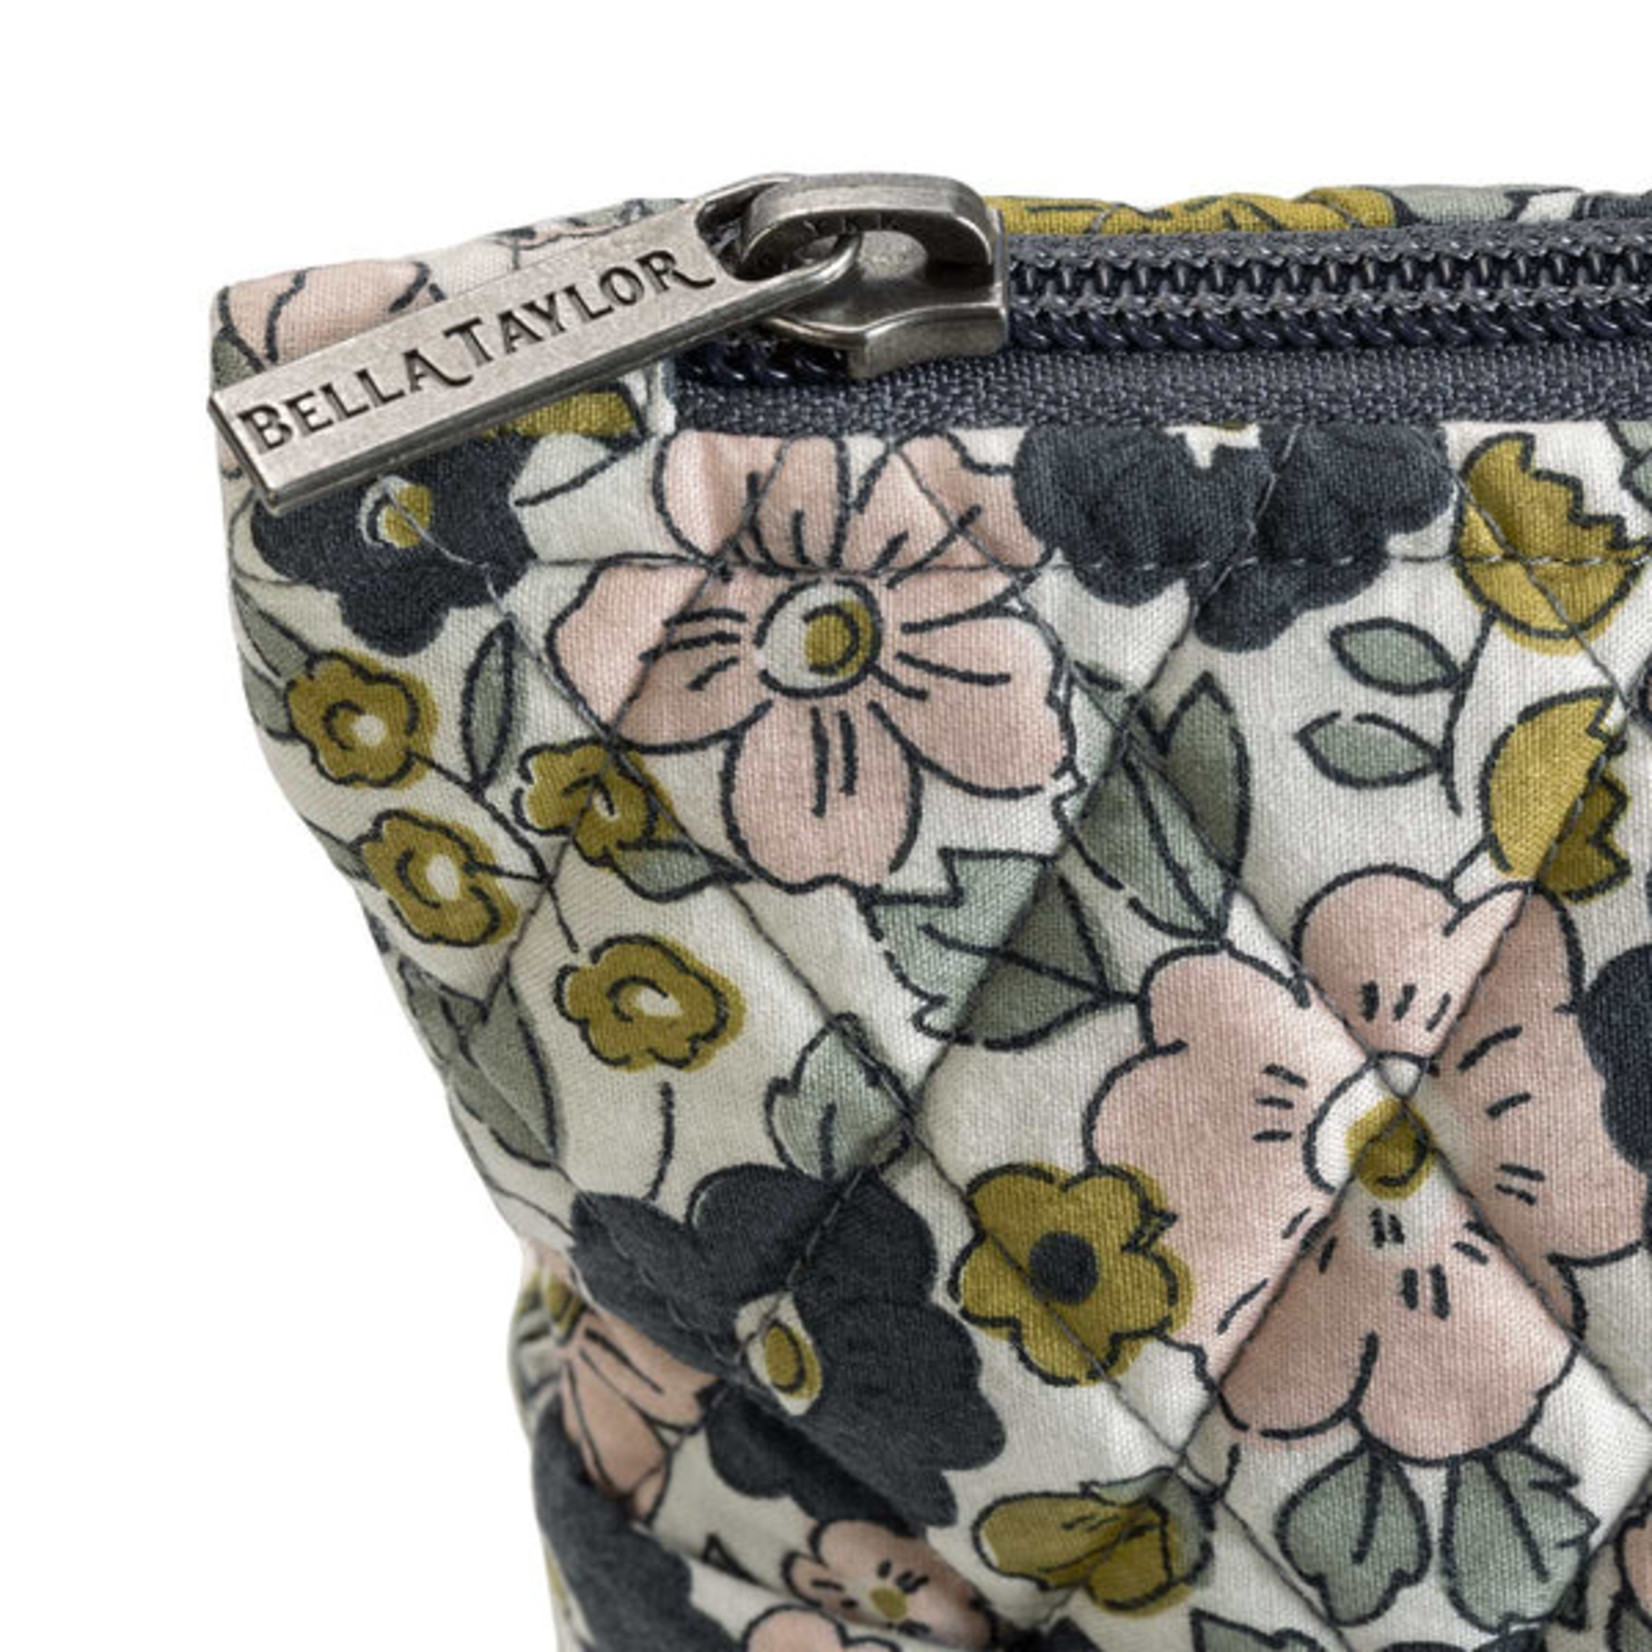 Bella Taylor Delicate Floral Charcoal - Hipster